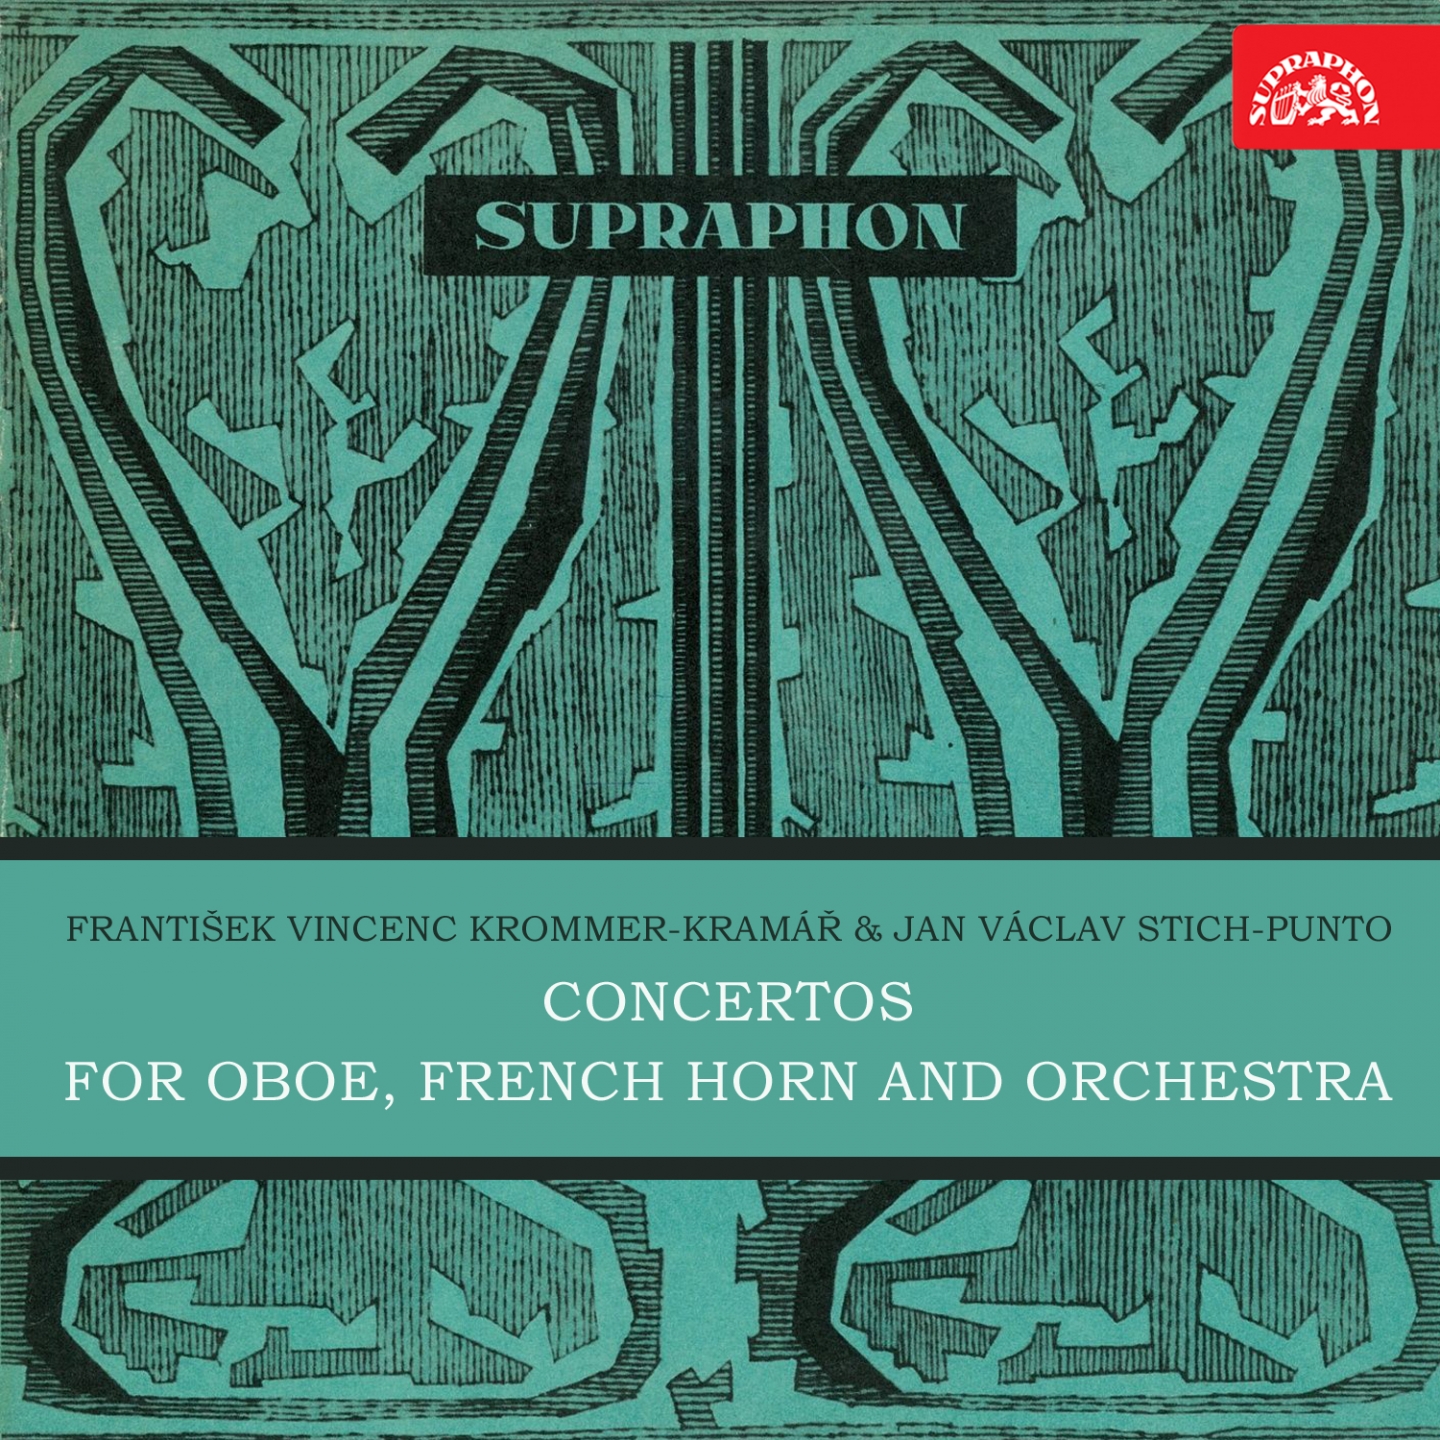 Concerto for French Horn and Orchestra No. 5 in F-Sharp Major, Op. 52, .: II. Adagio